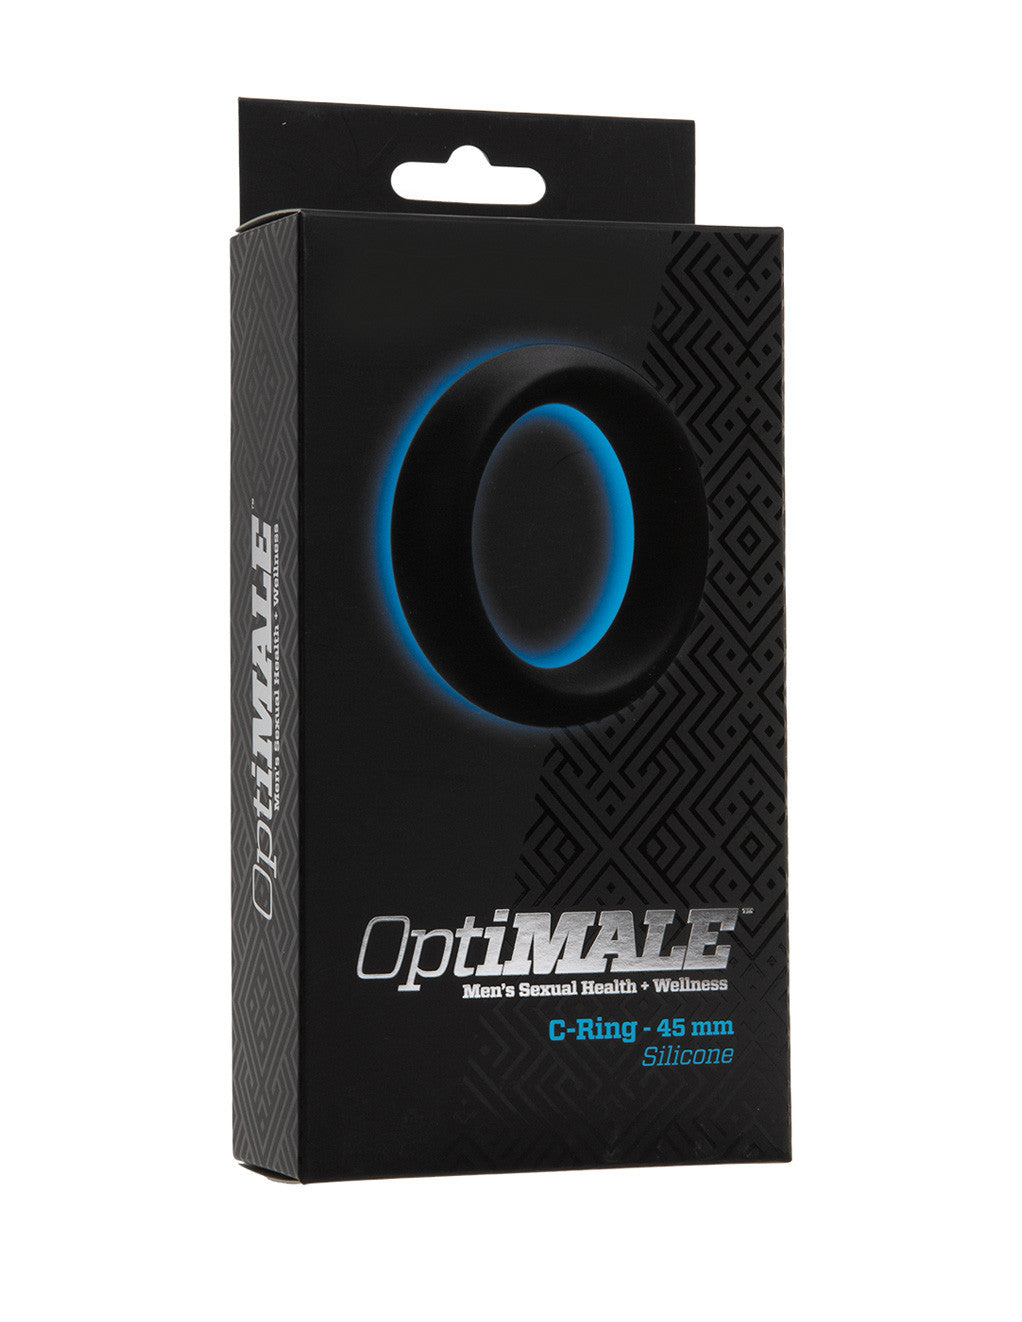 Optimale by Doc Johnson Cockring 45mm Black Package